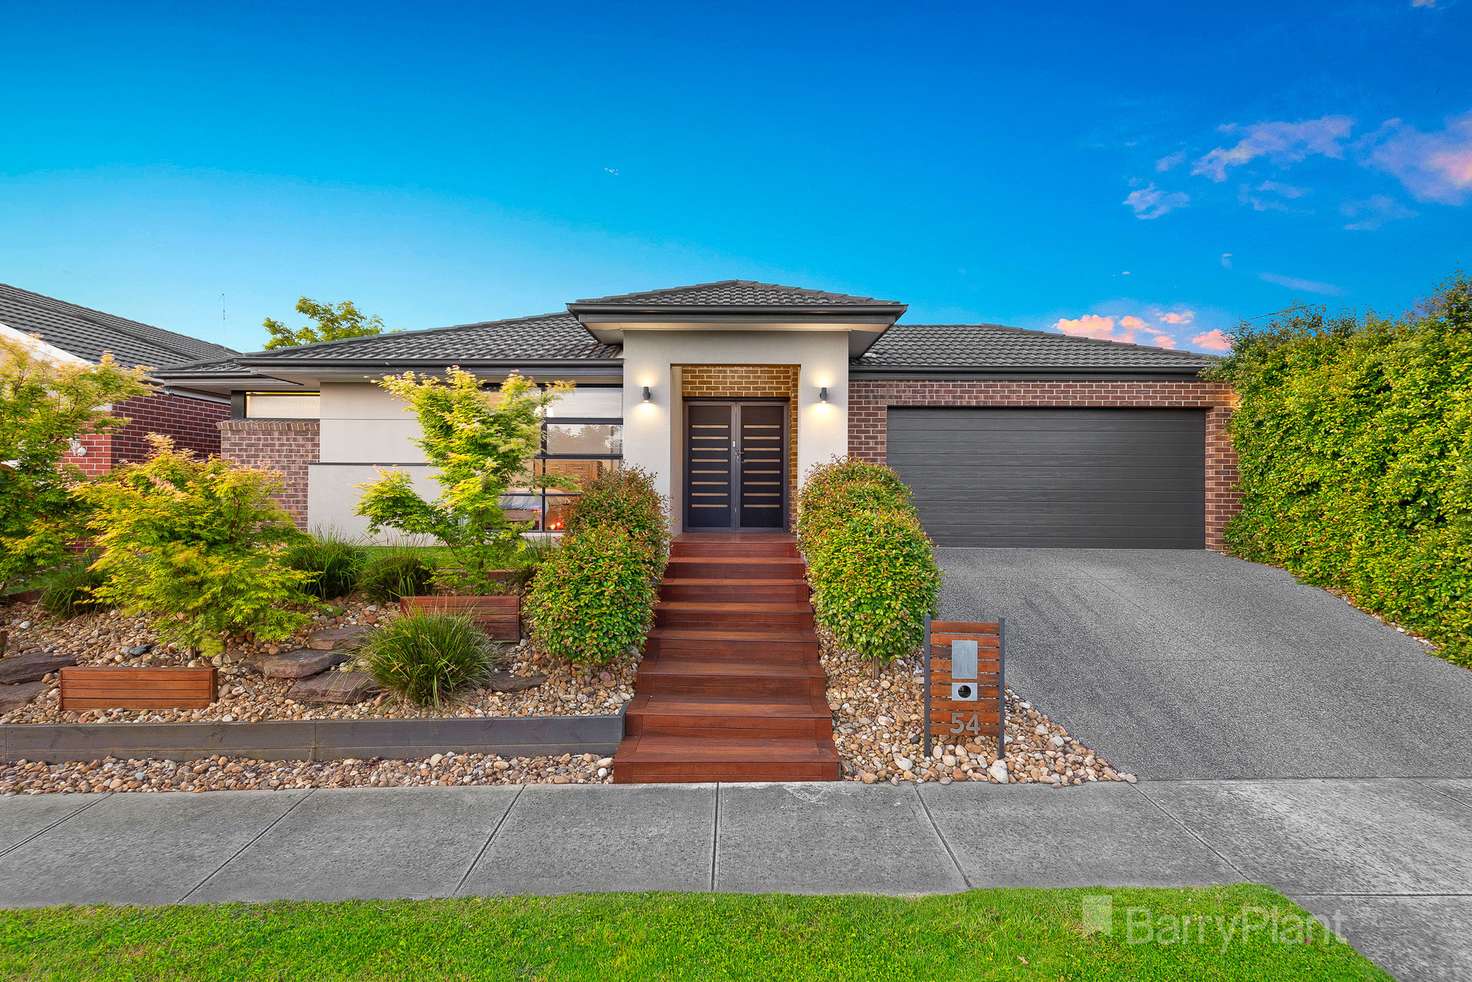 Main view of Homely house listing, 54 Harrison Way, Pakenham VIC 3810